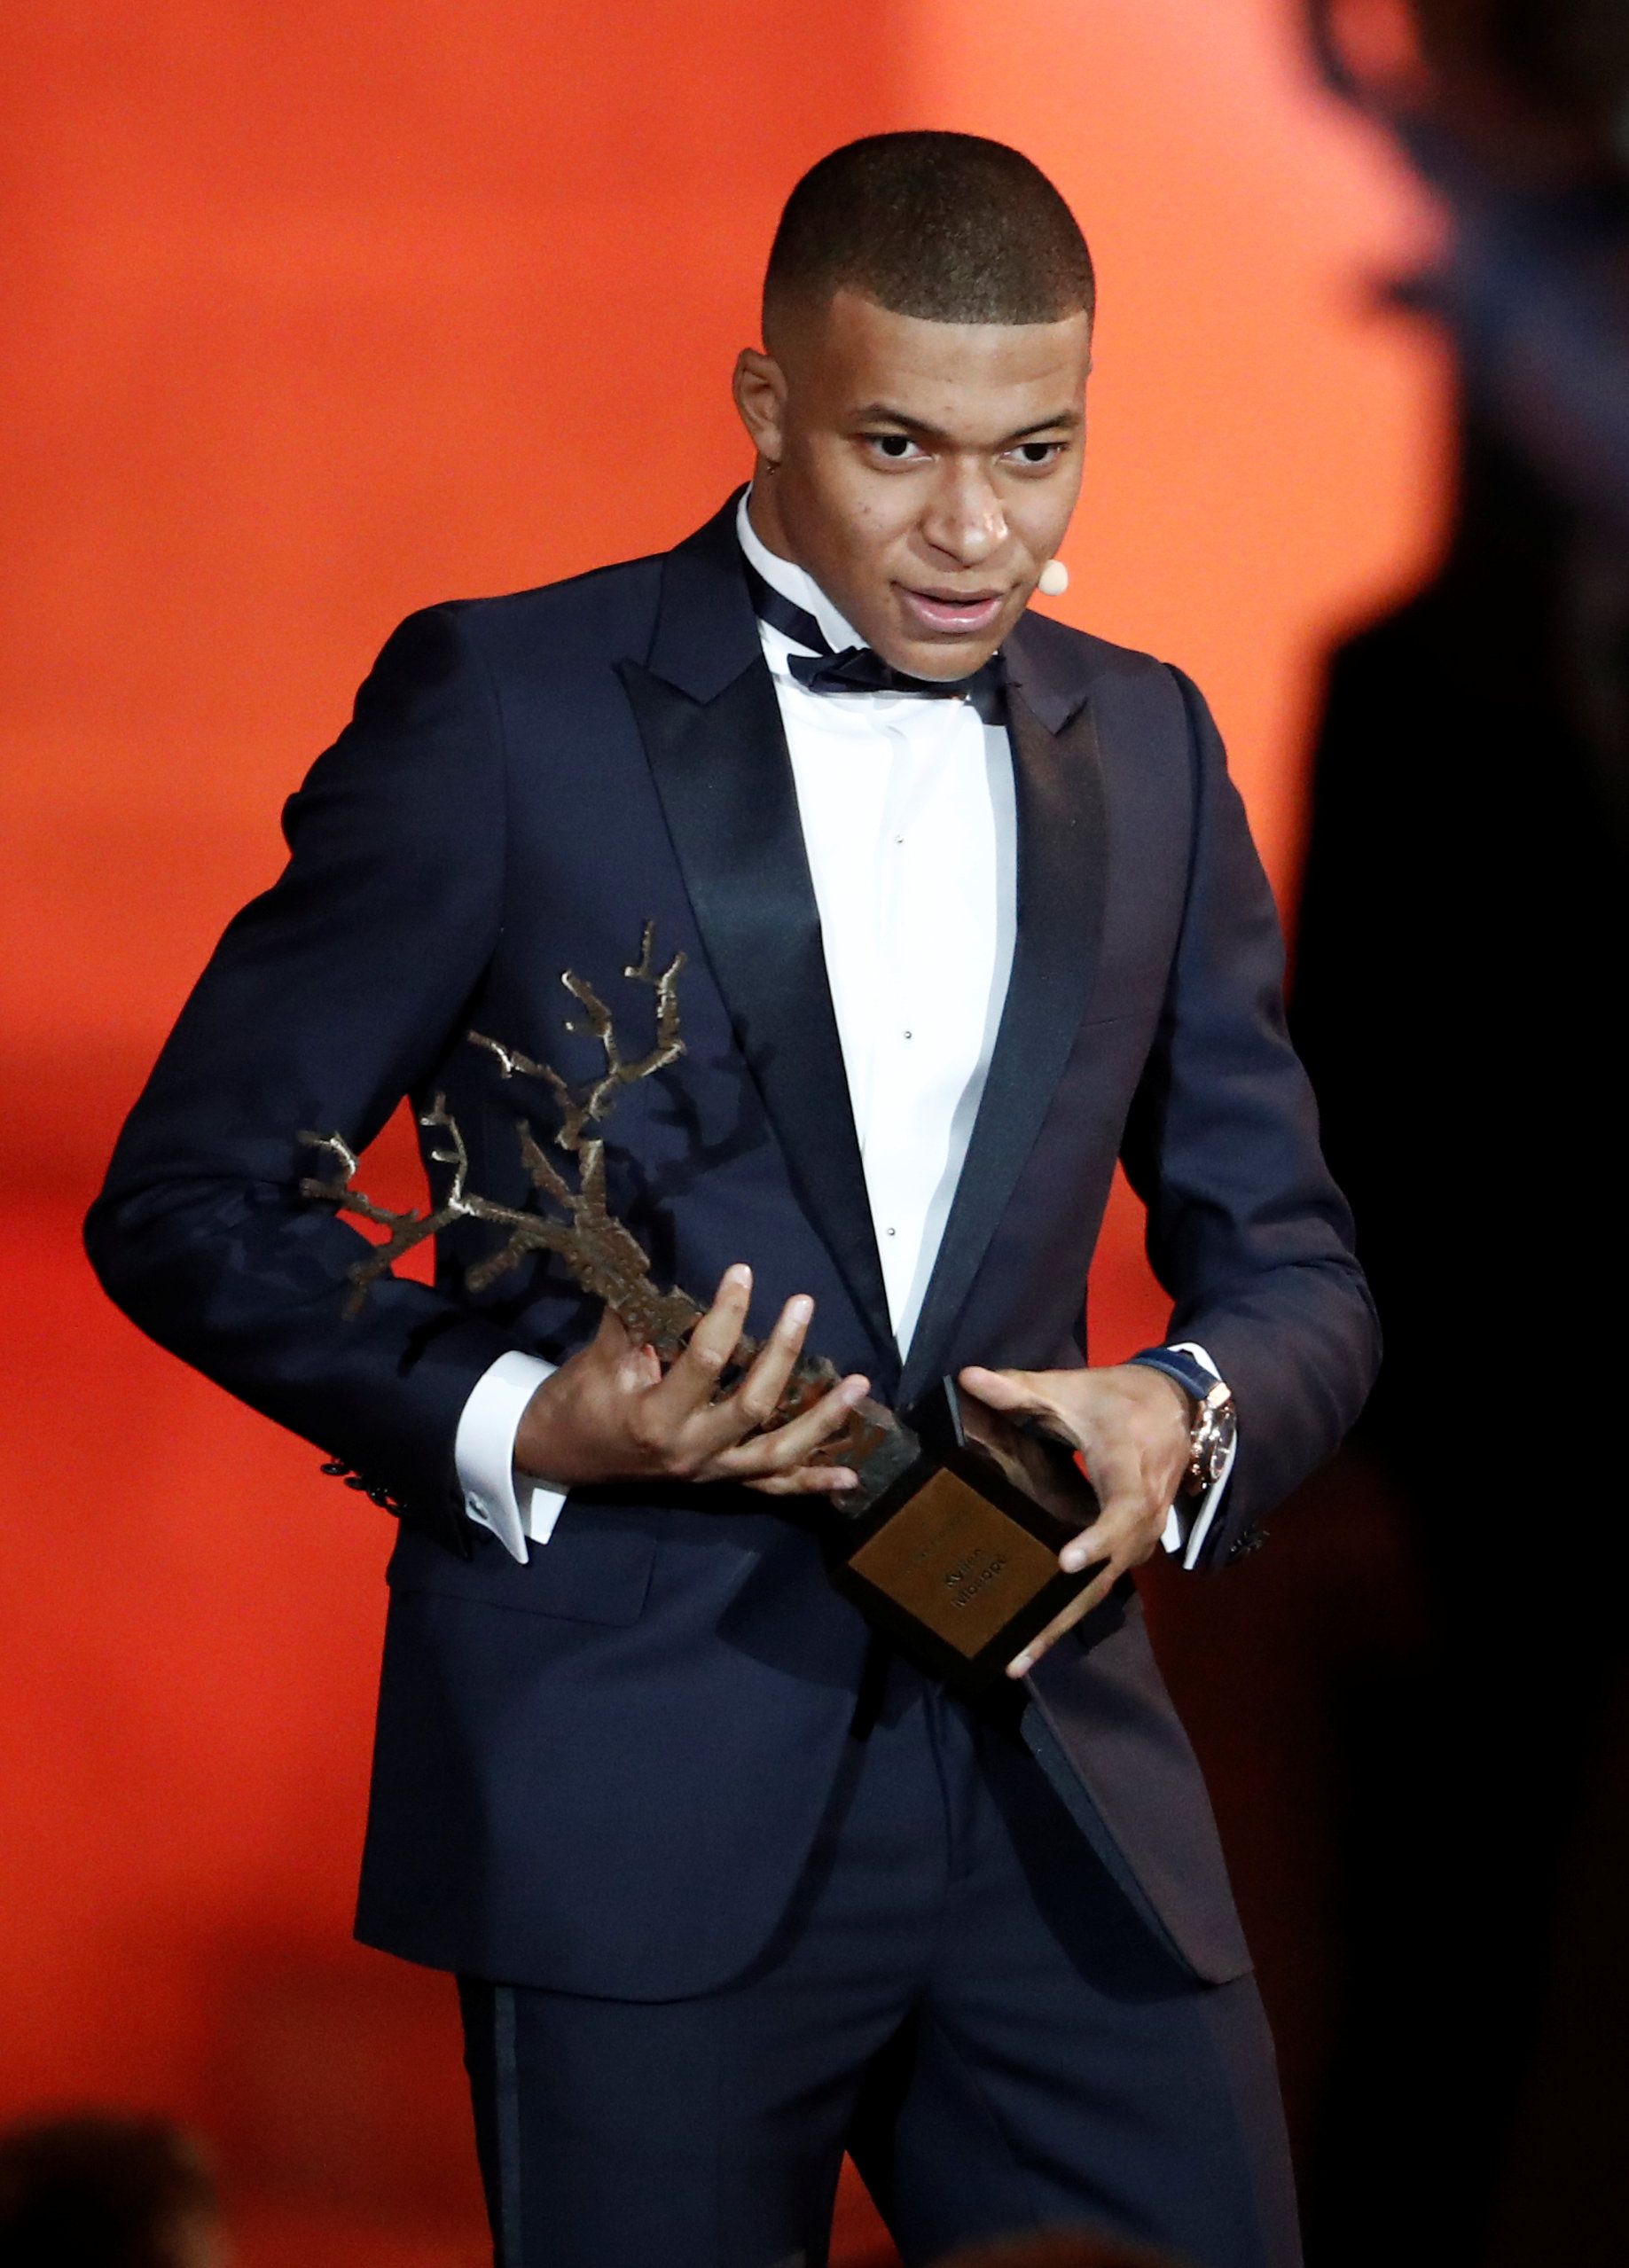 Mbappe at the 2018 Ballon d'Or gala.